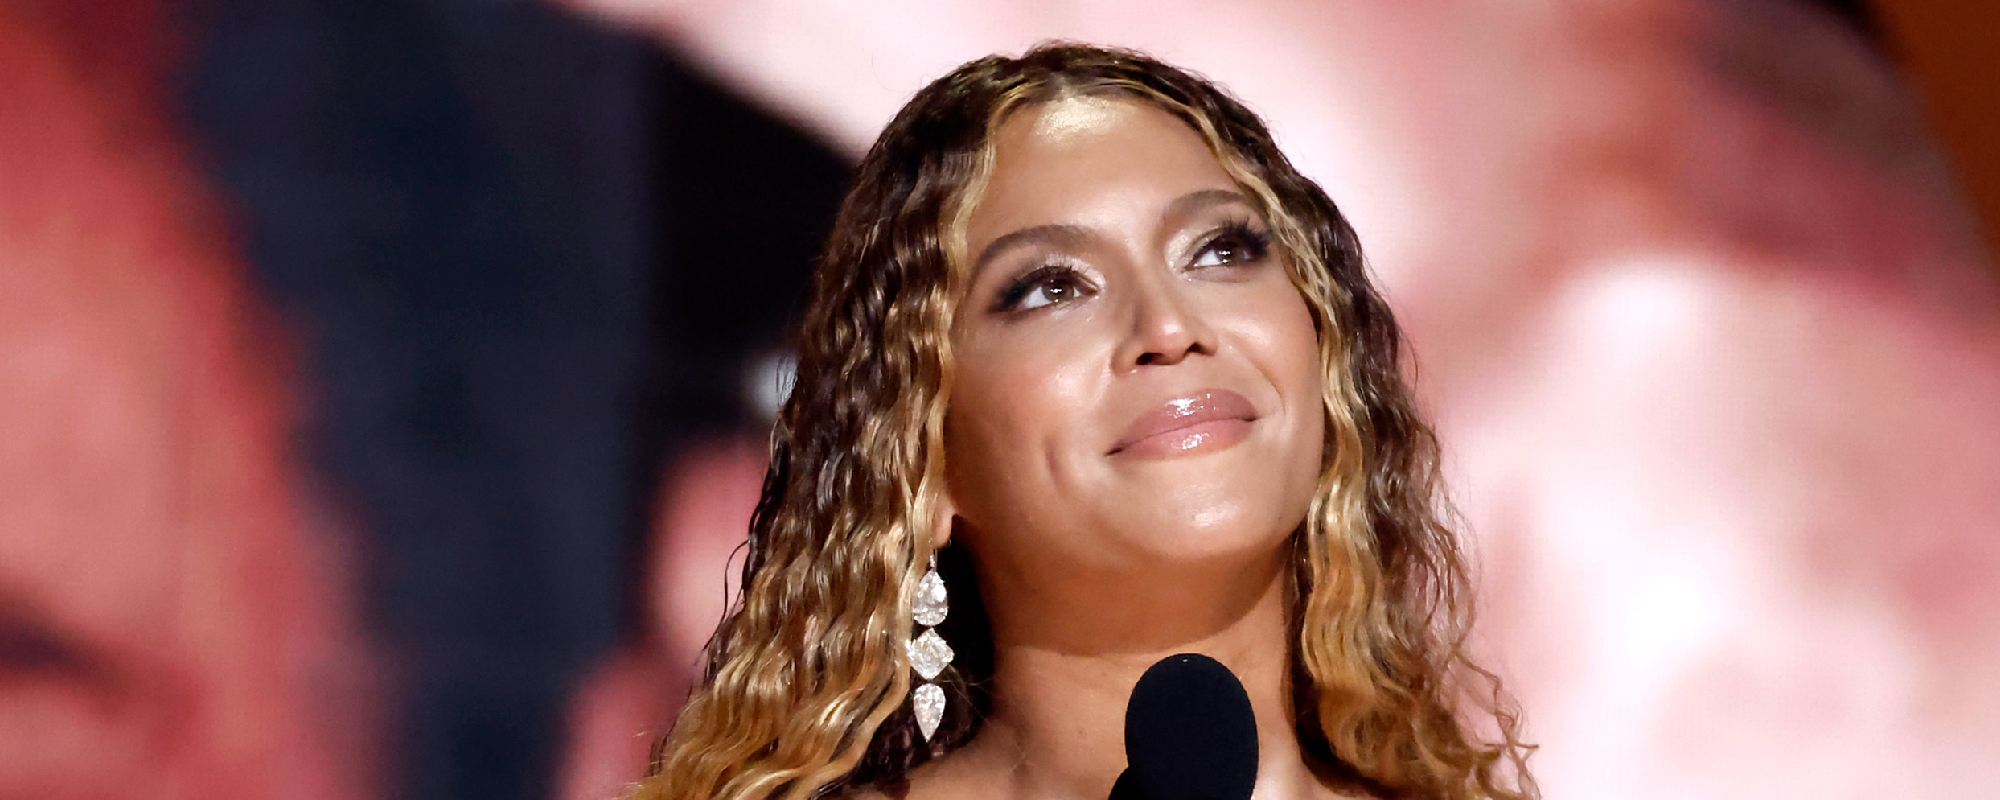 Oklahoma Country Station Speaks Out After Refusing To Play Beyoncé Song